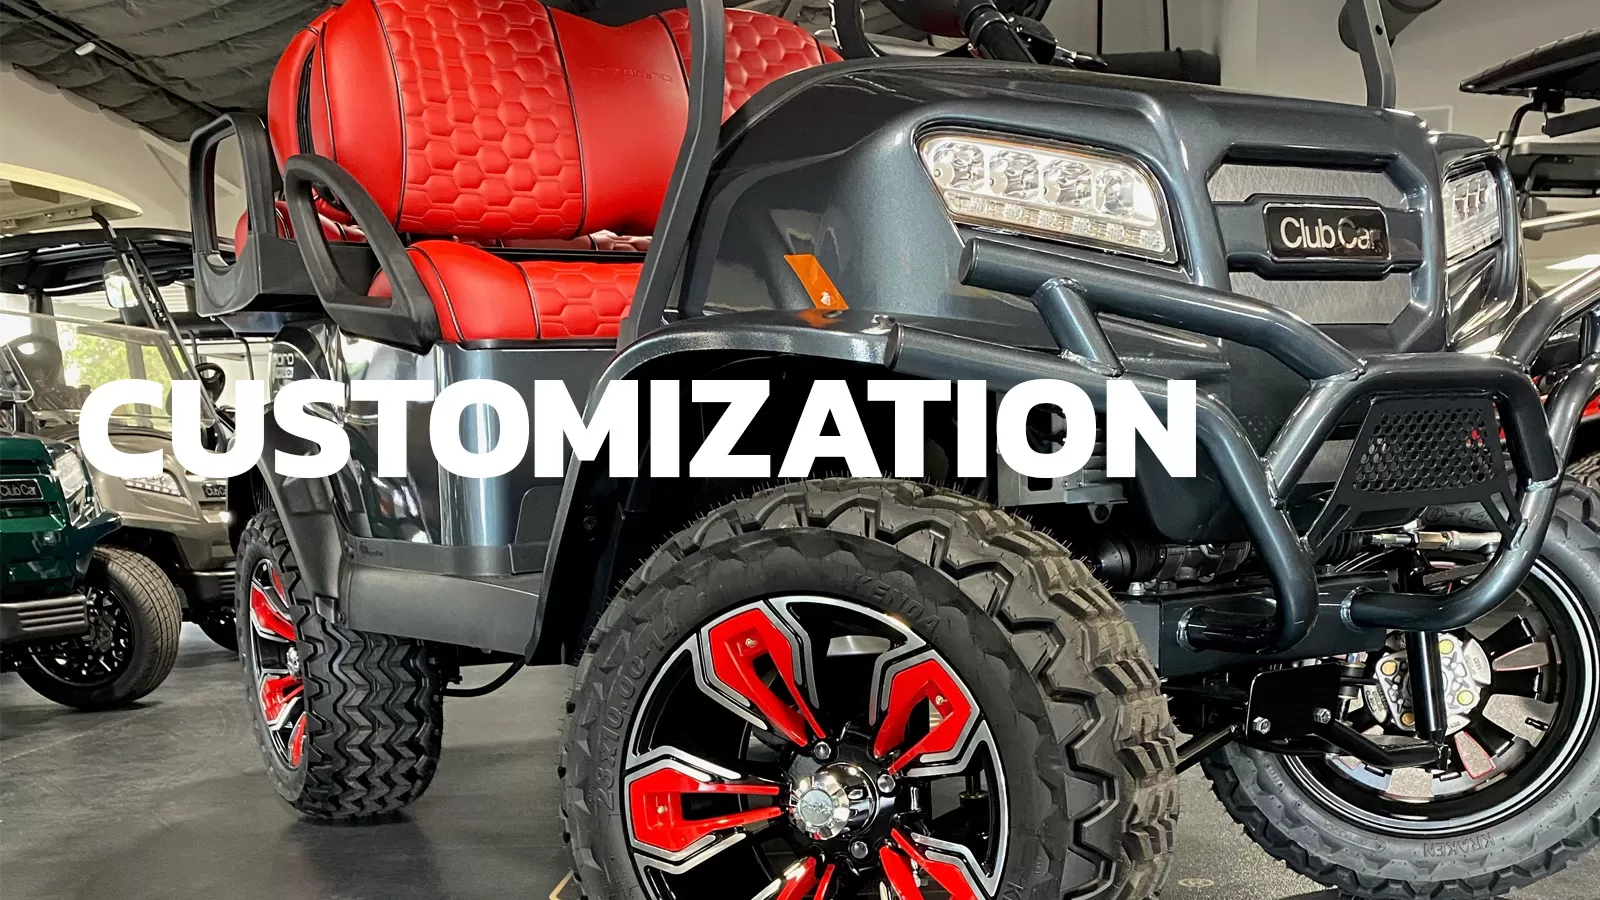 Customization: Personalize Your Ride